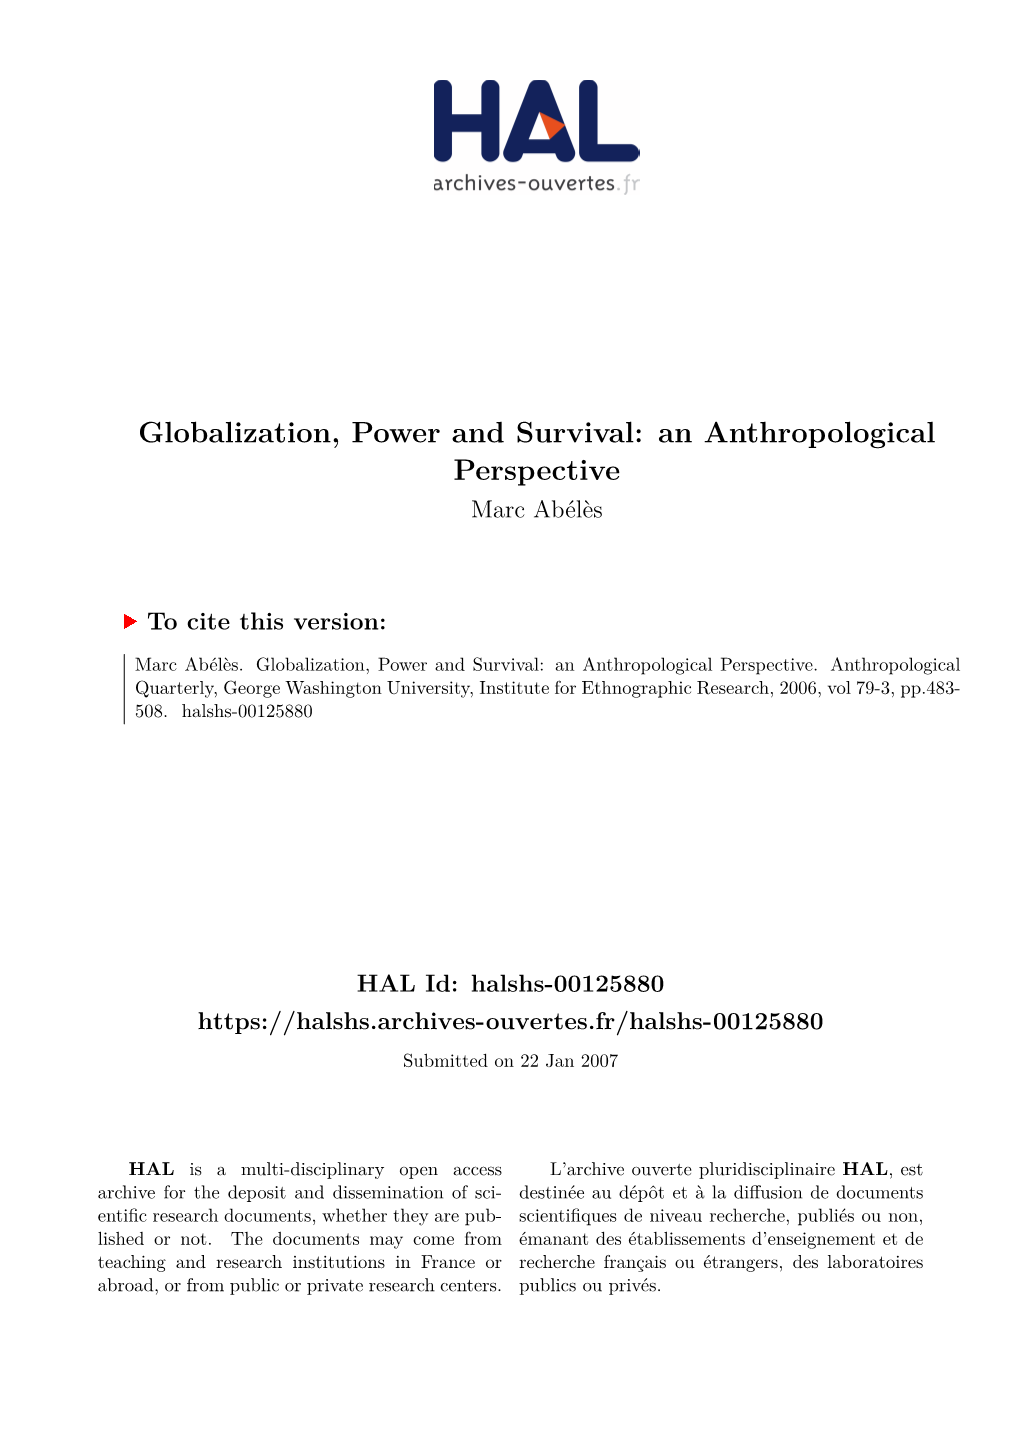 Globalization, Power and Survival: an Anthropological Perspective Marc Abélès